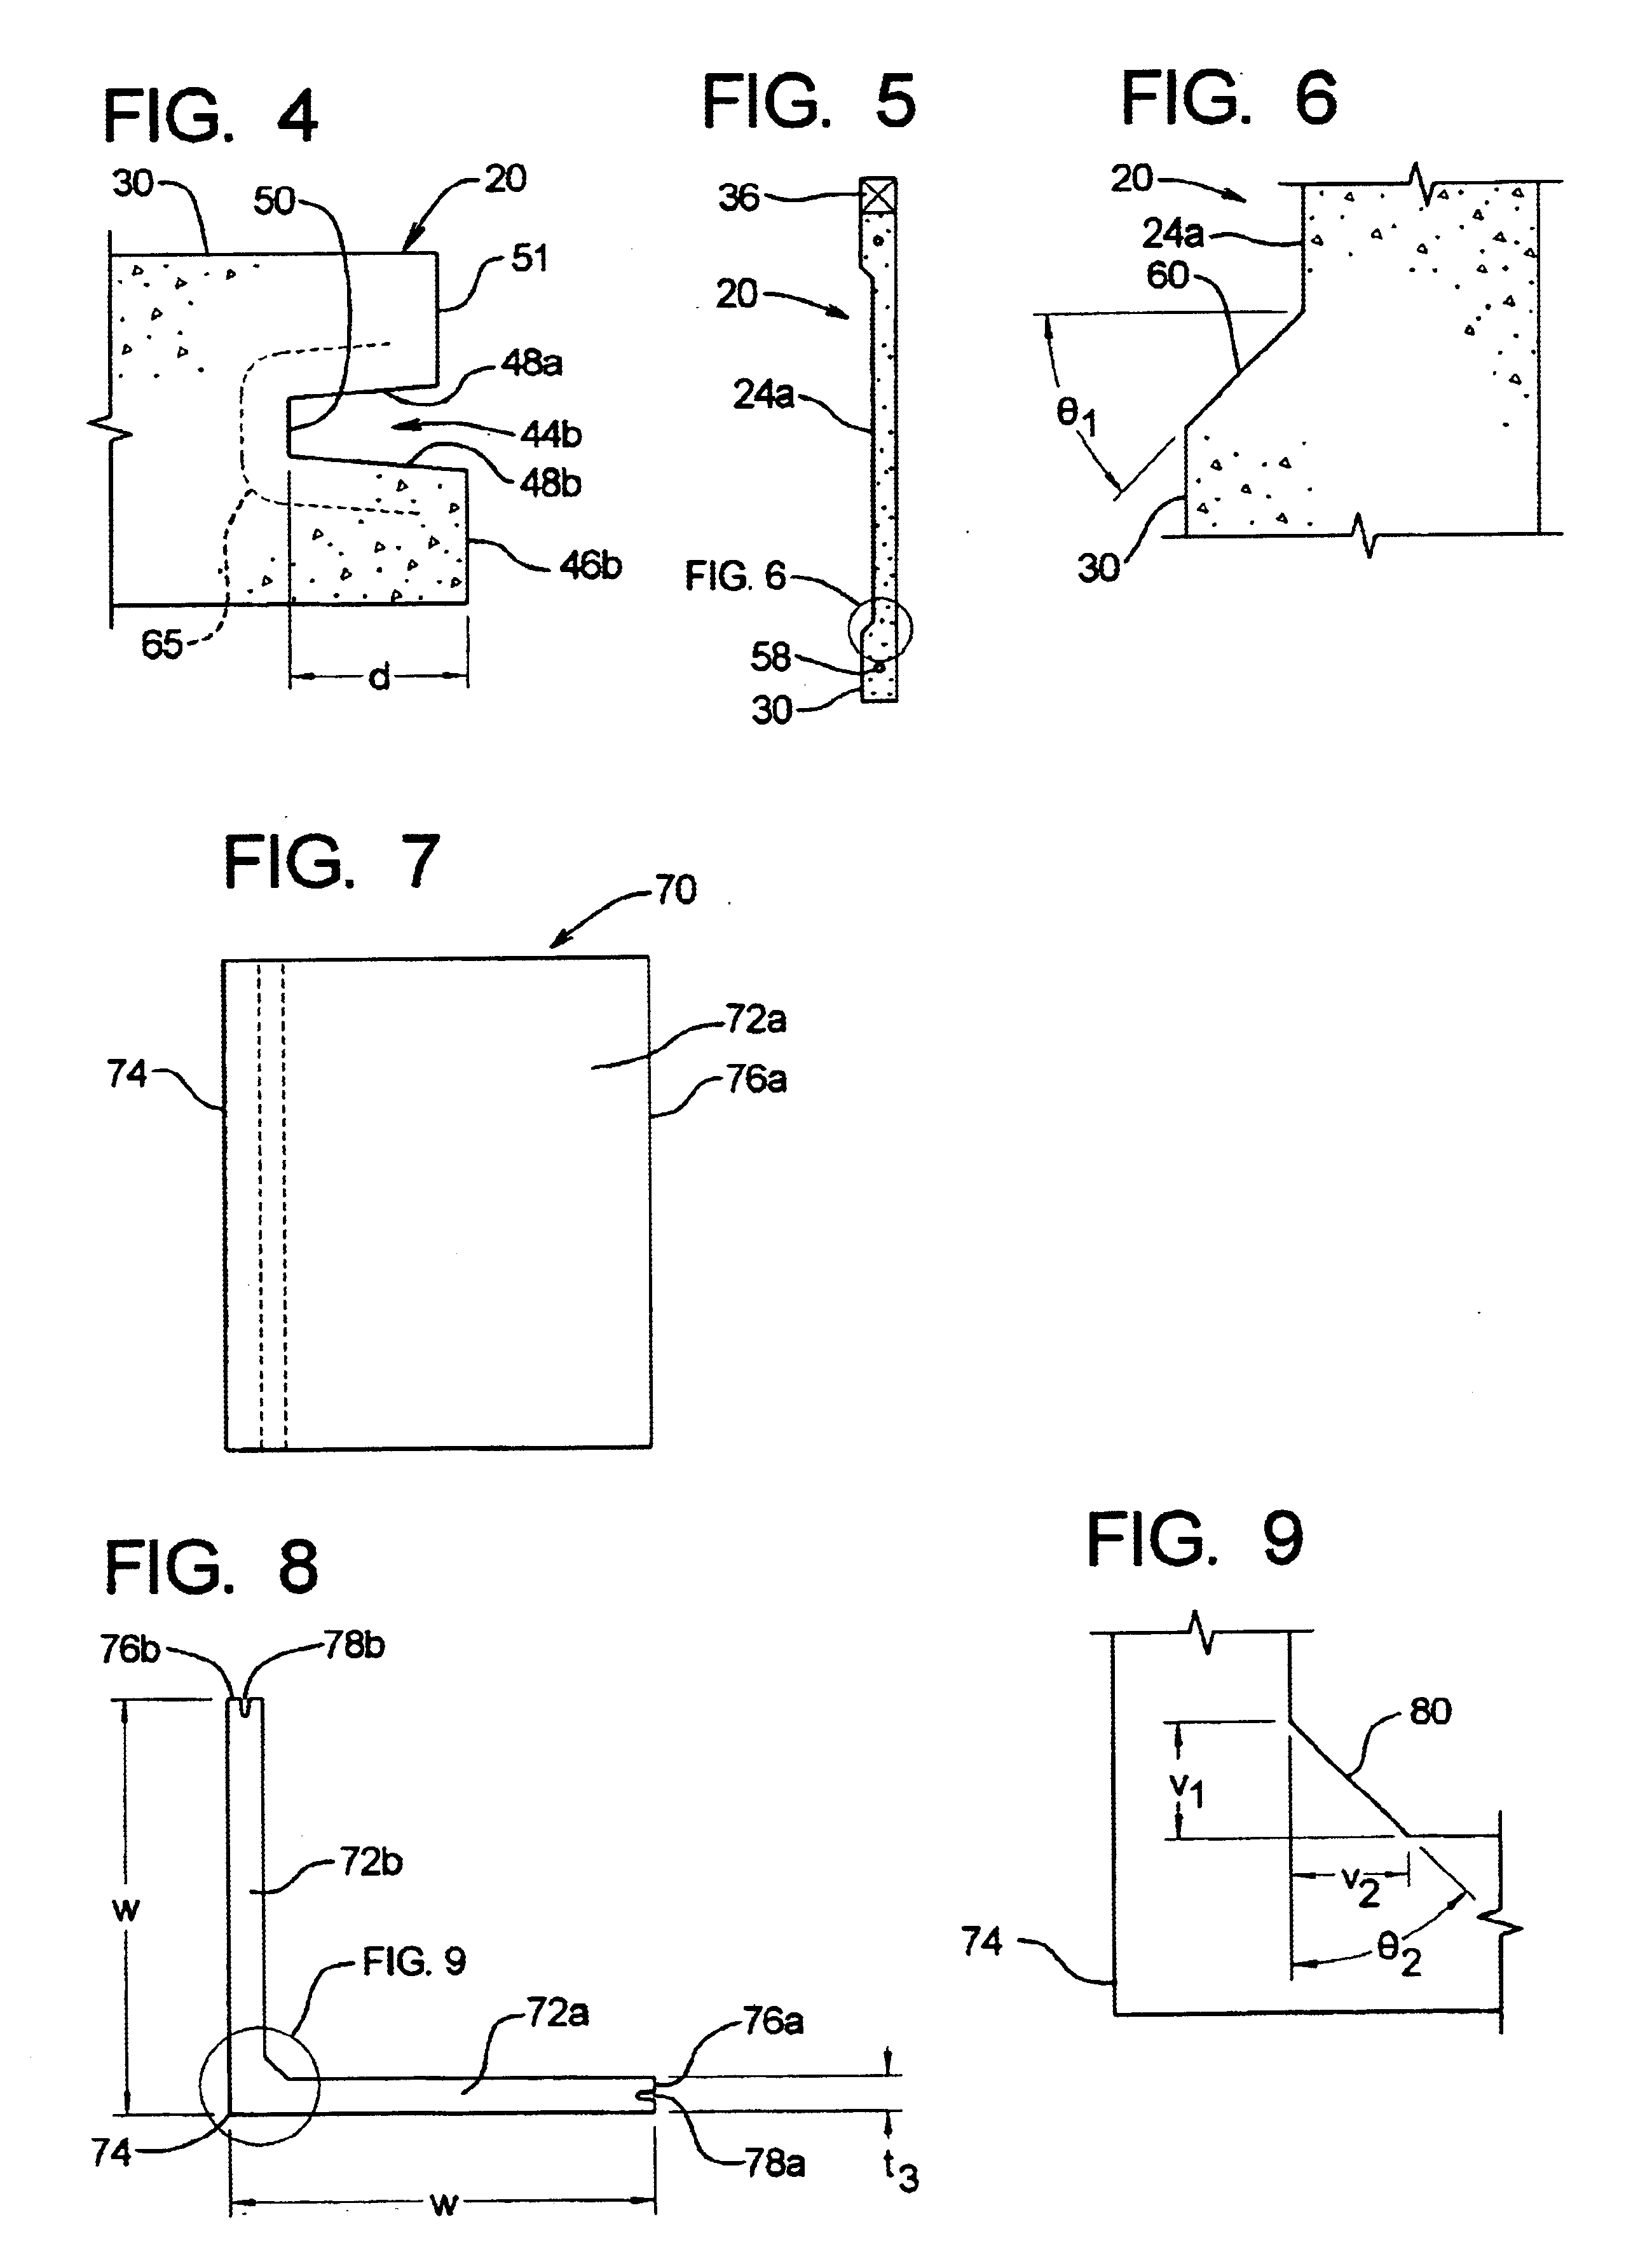 Concrete panel skirting system for manufactured homes and method for making the same